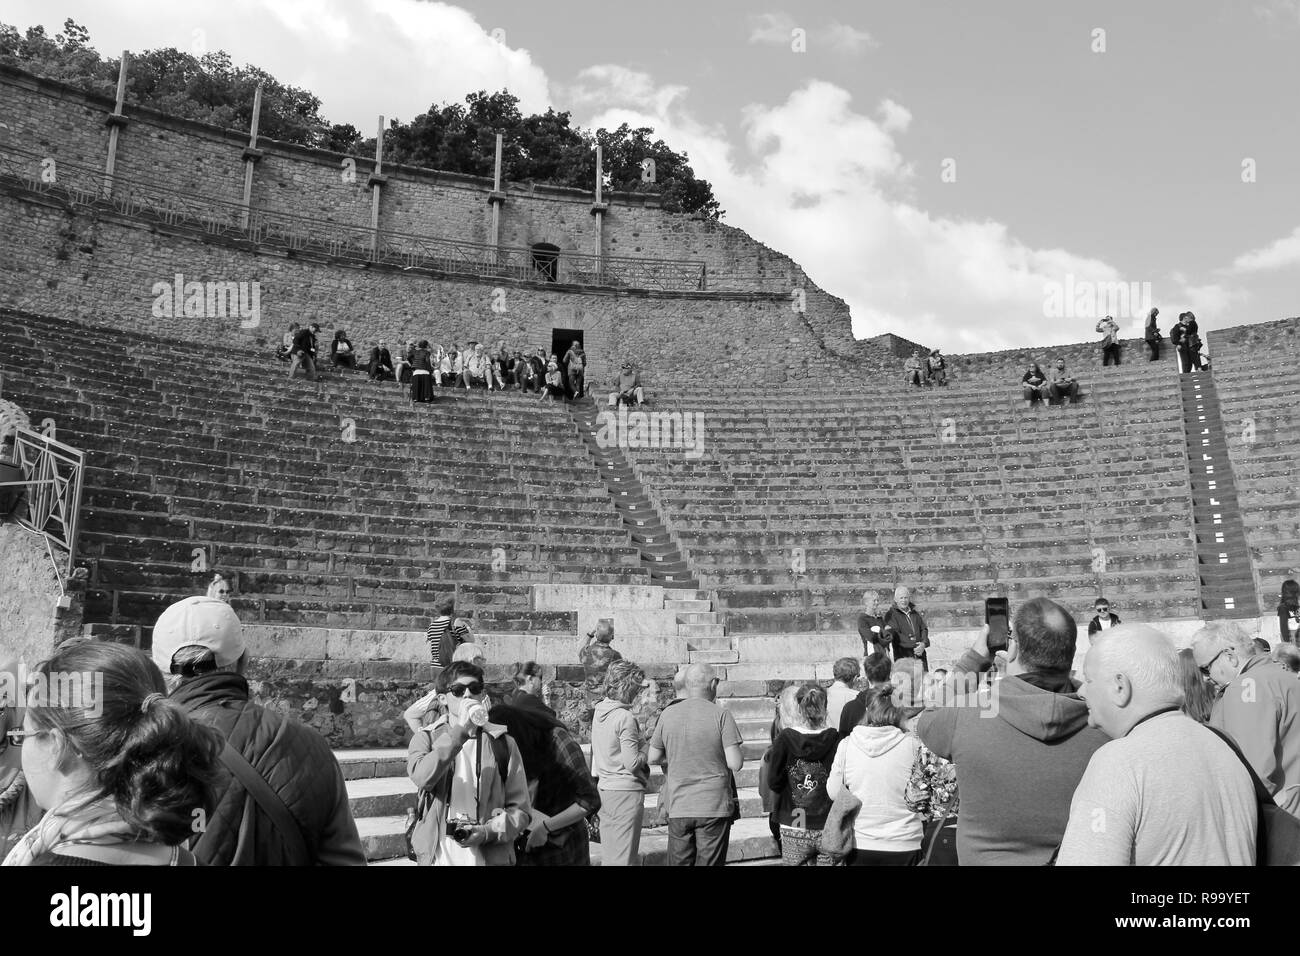 Pompeii, Italy - October 23rd 2018: Tourists explore the ruins of the amphitheater in the ancient city of Pompeii. Stock Photo